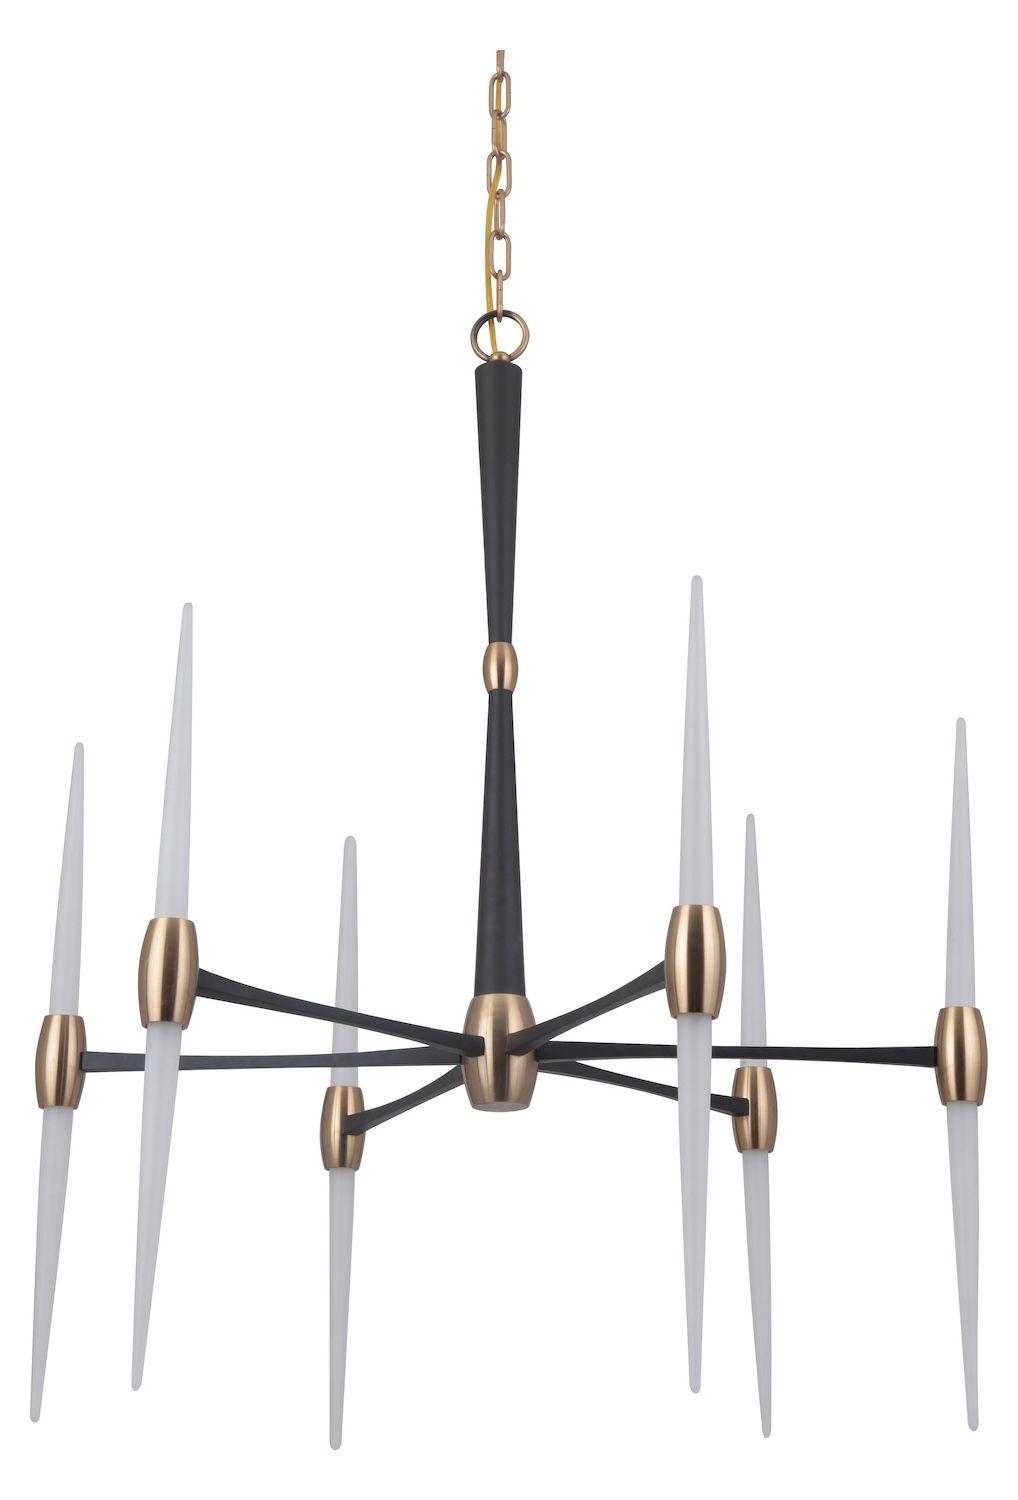 Latest Craftmade 6 Light Flat Black/Satin Brass Led Chandelier In Satin Black 42 Inch Six Light Chandeliers (View 7 of 15)